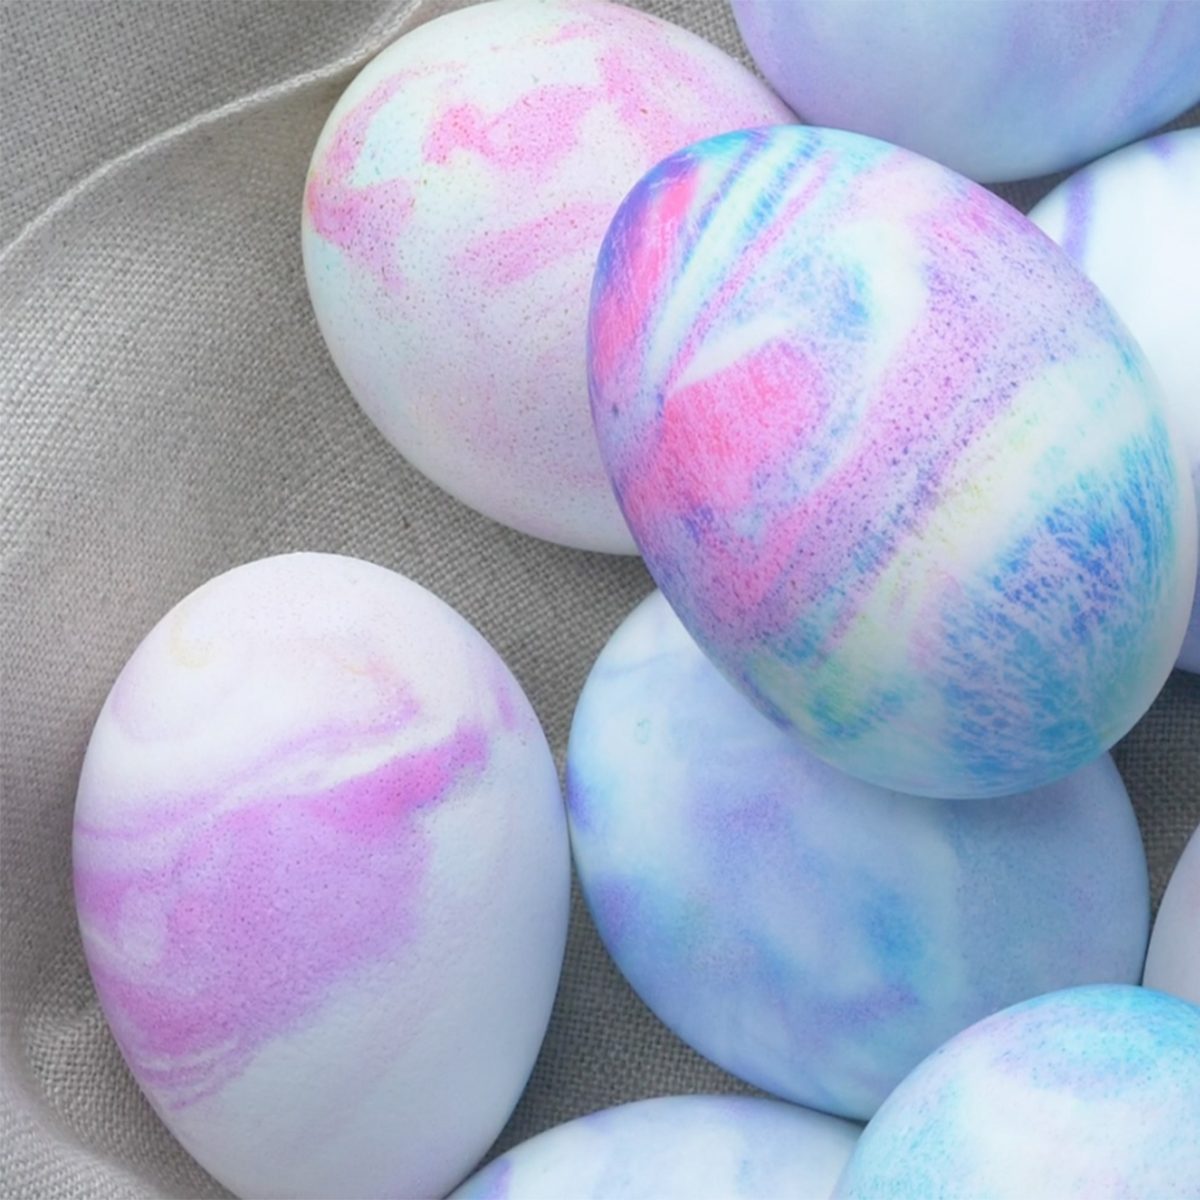 12 Must-Try Modern Easter Decorating Ideas - Easter Decorations Ideas